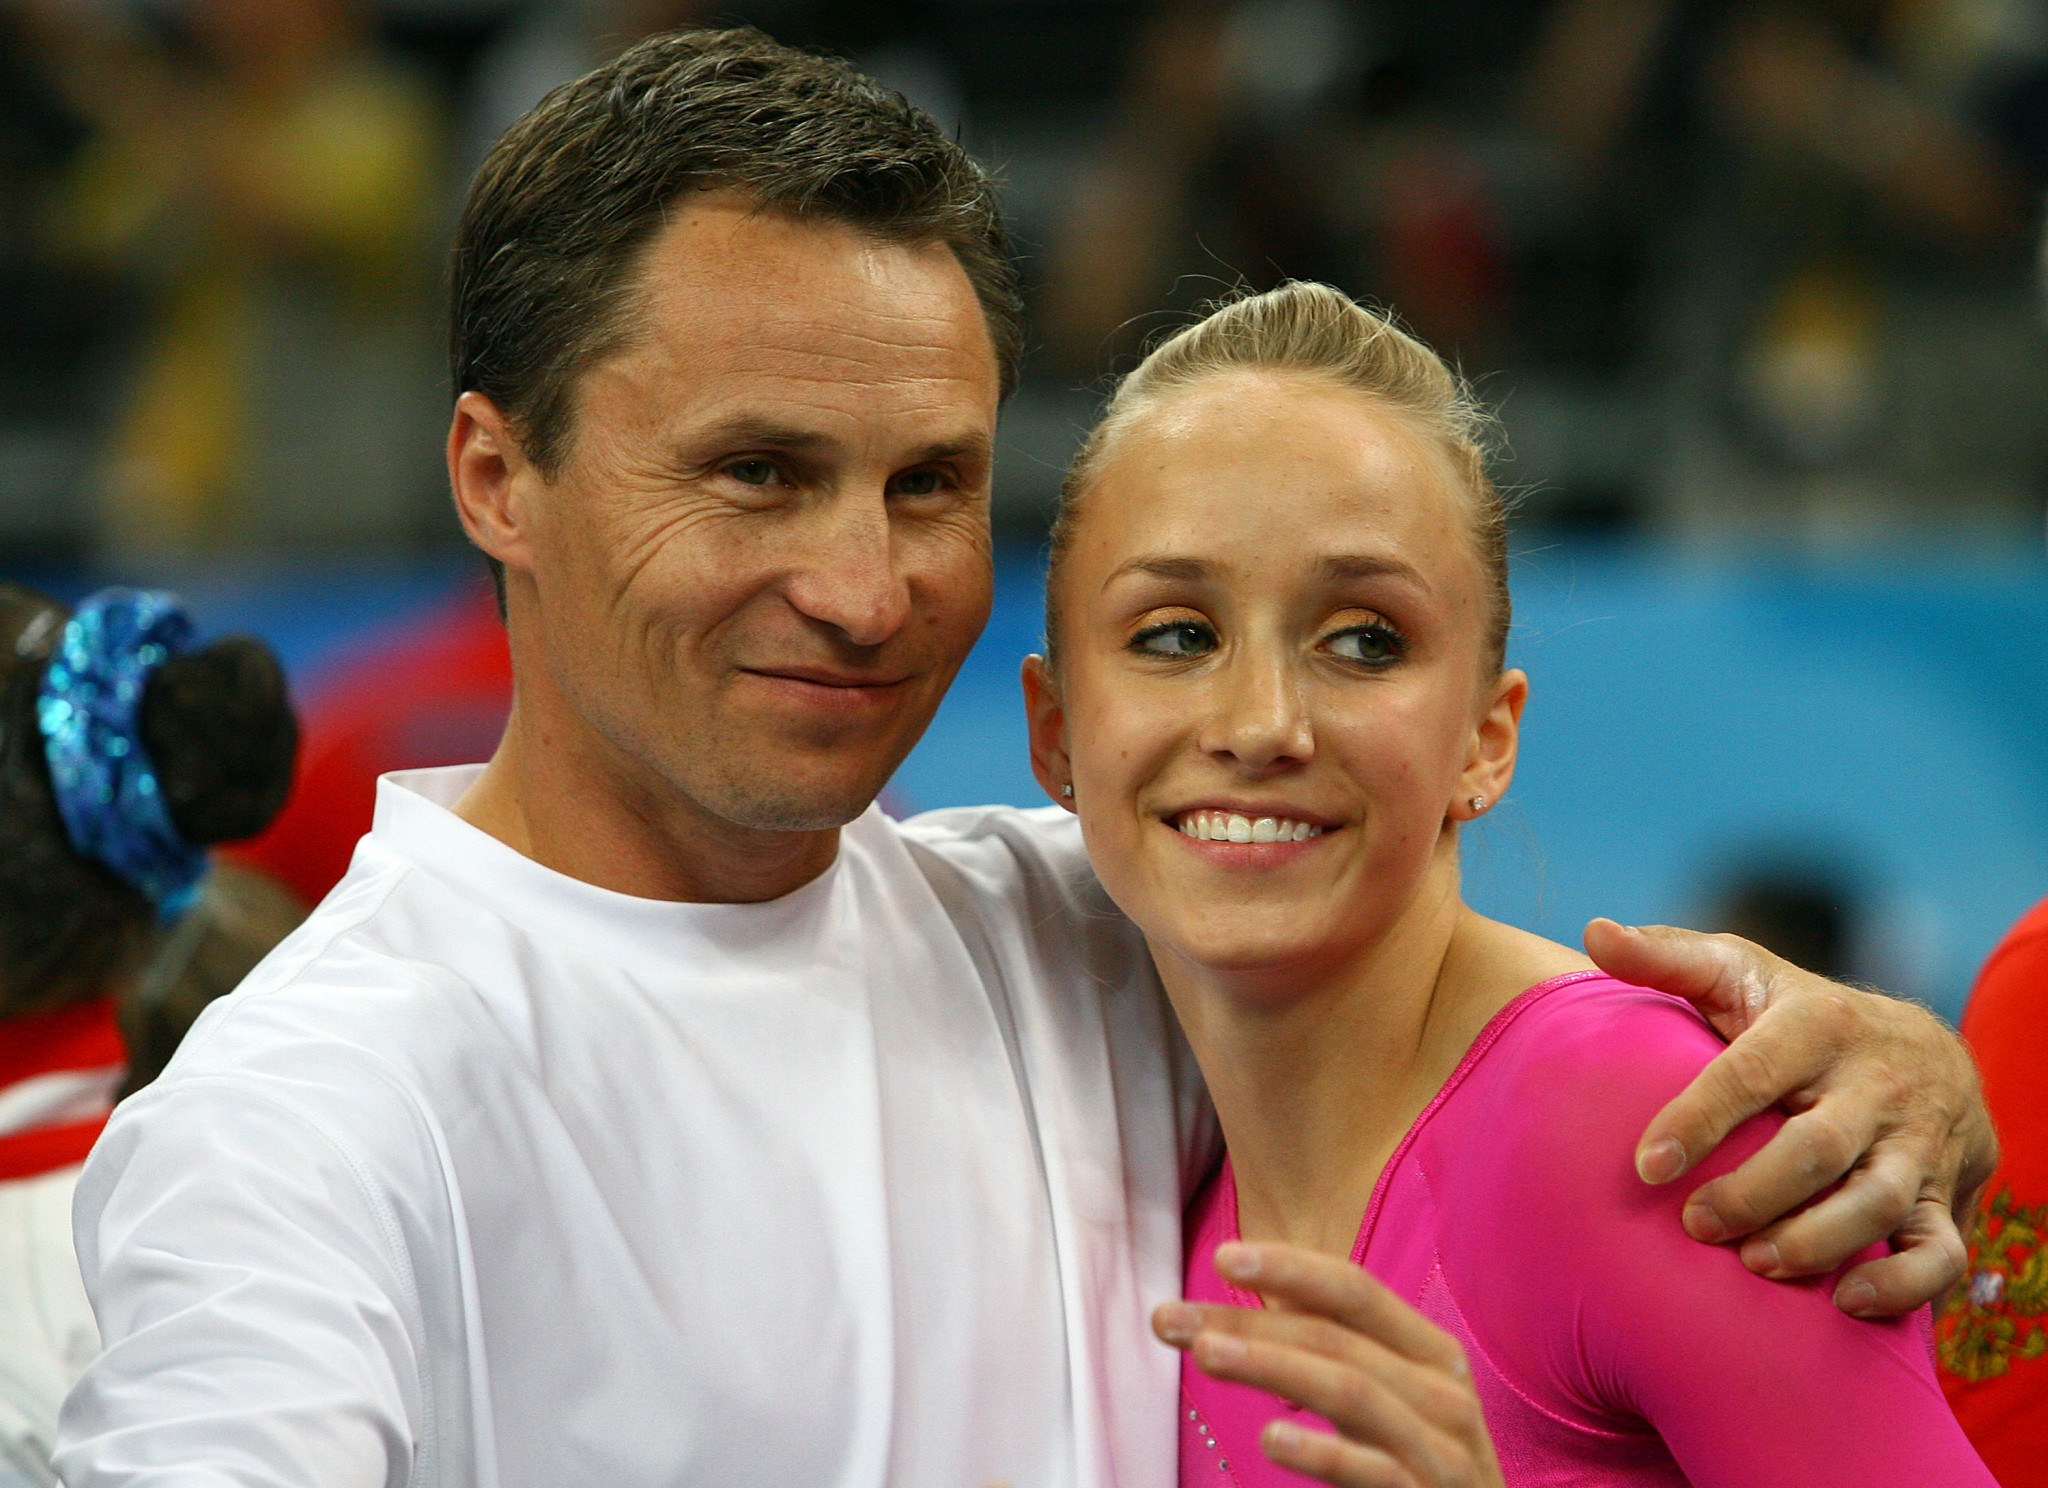 Valeri Lukin's daughter Nastia Lukin has claimed he is committed to the safeguarding of athletes ©Getty Images